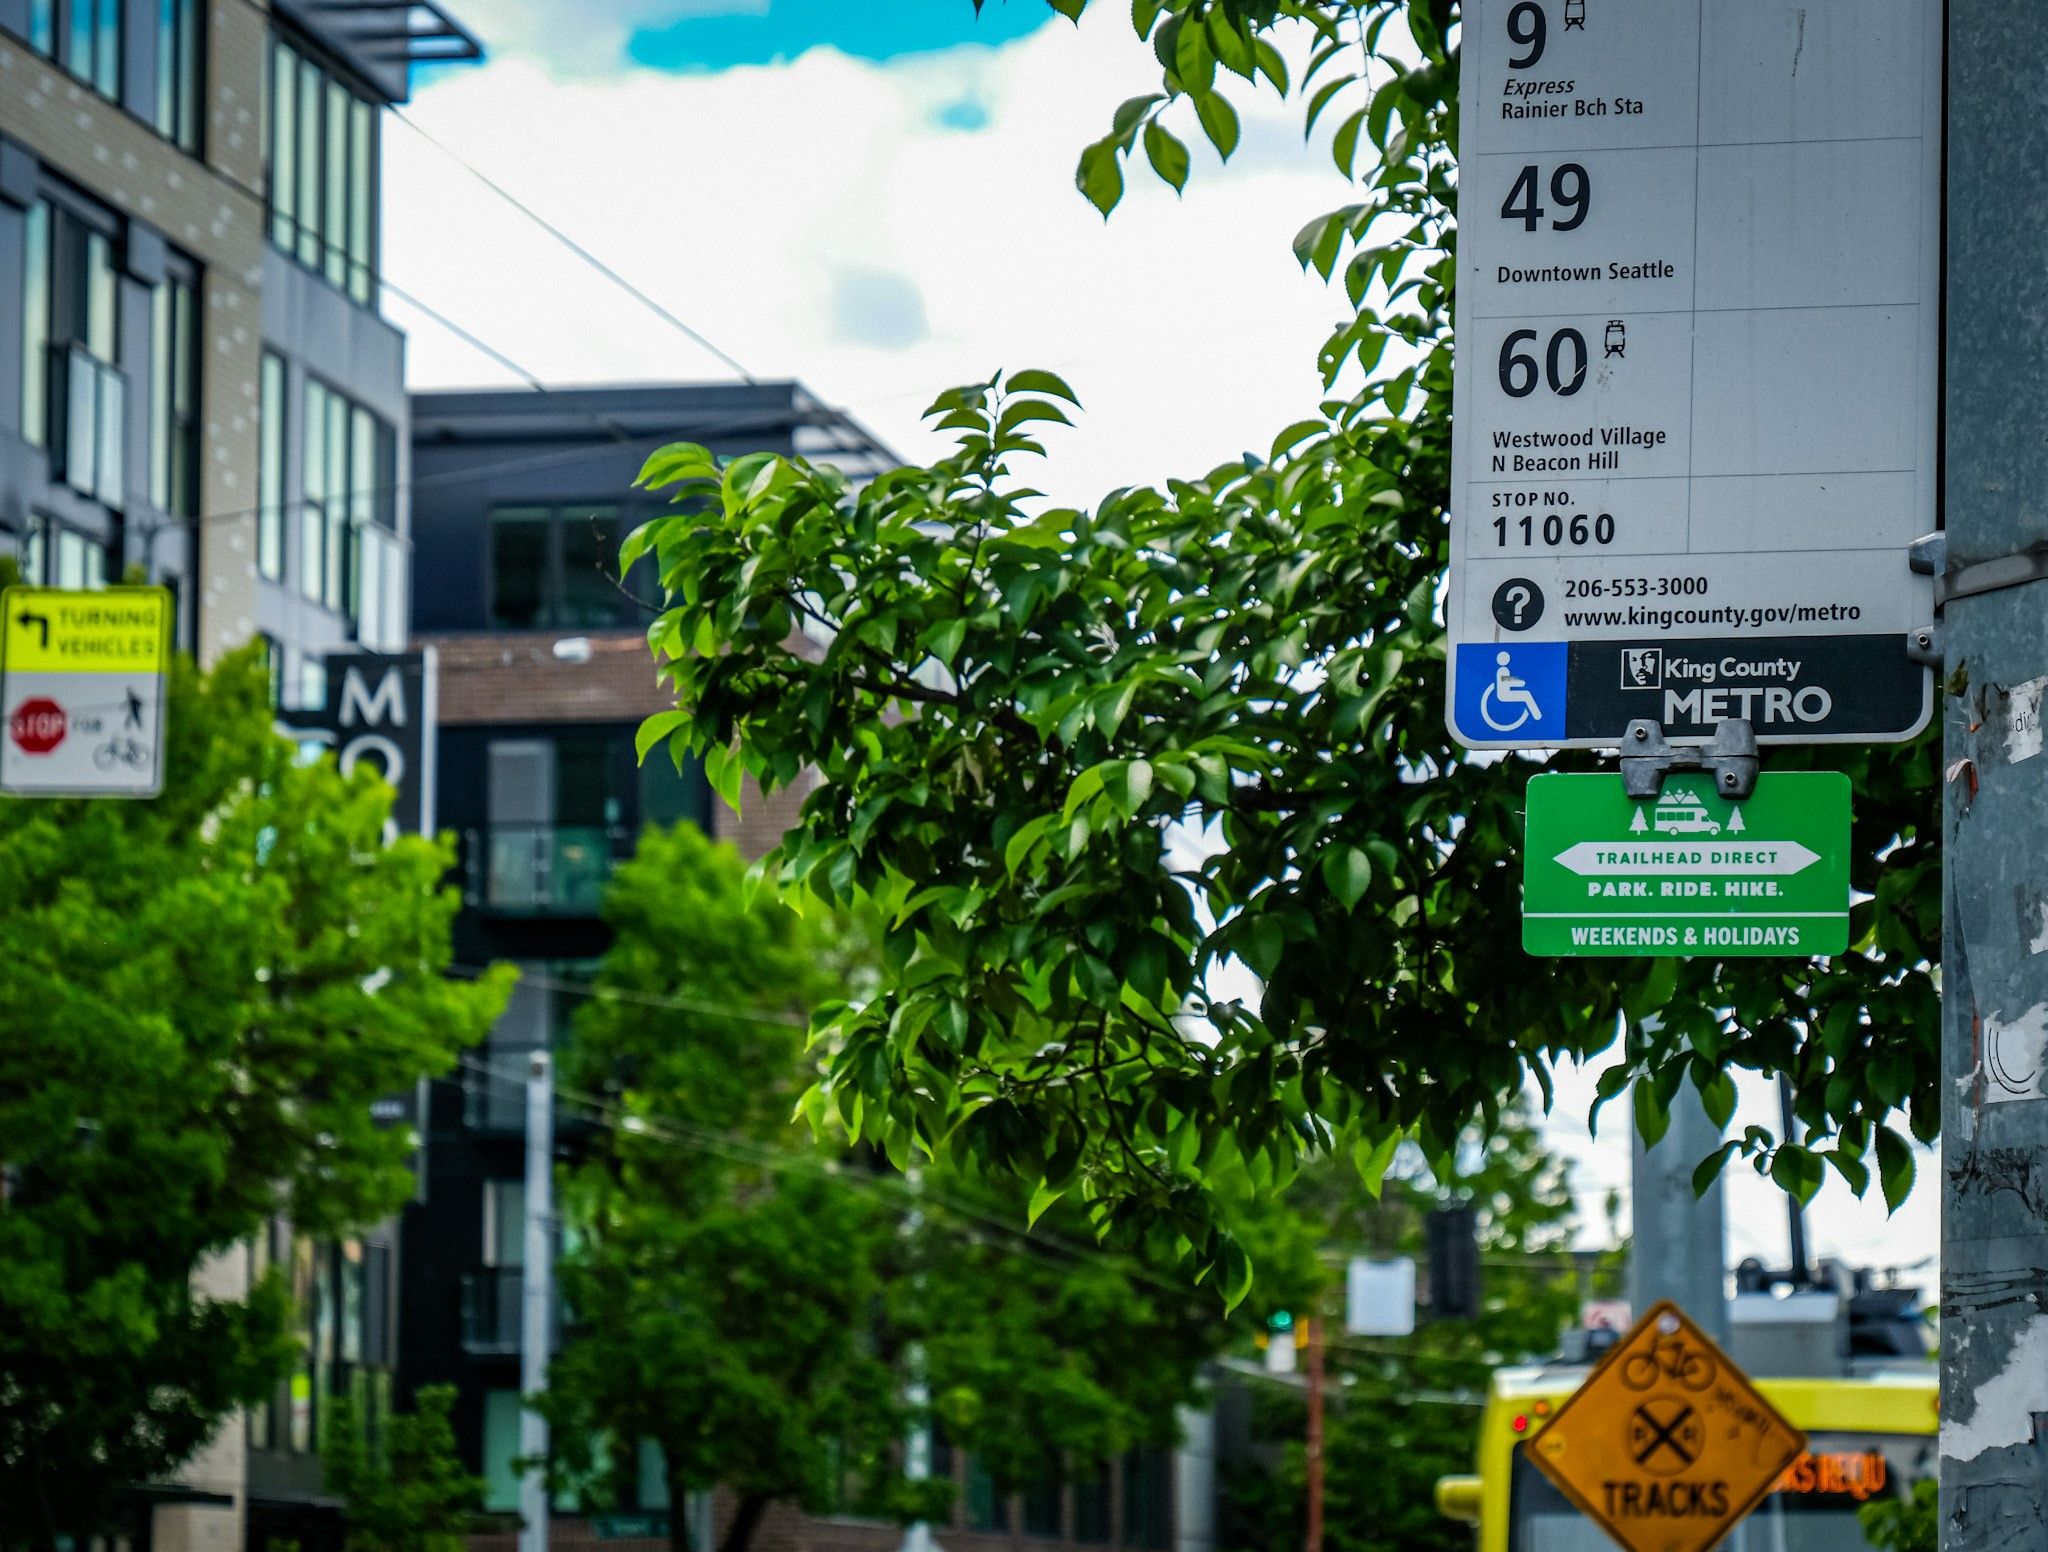 A bus route sign with an additional green placard hanging below it that says "Trailhead Direct." Trees and street in background.